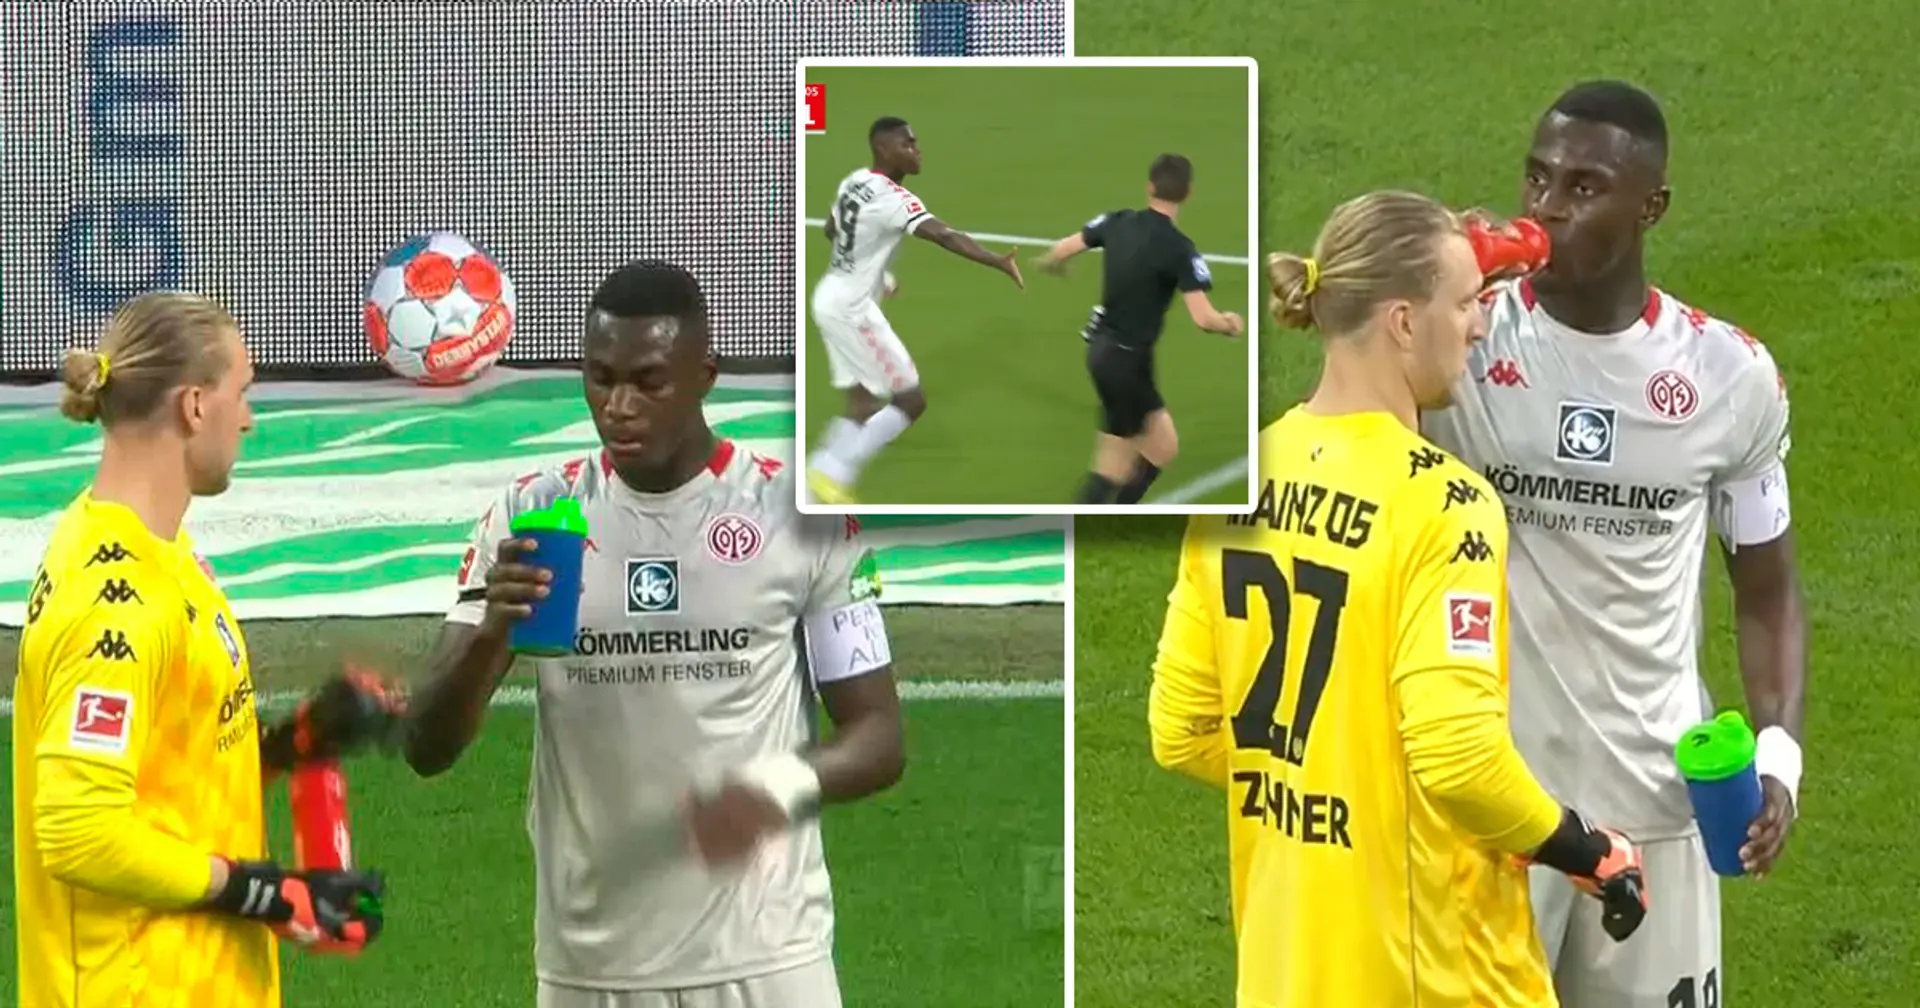 Bundesliga referee stops play as Mainz player ends his Ramadan fast after sunset